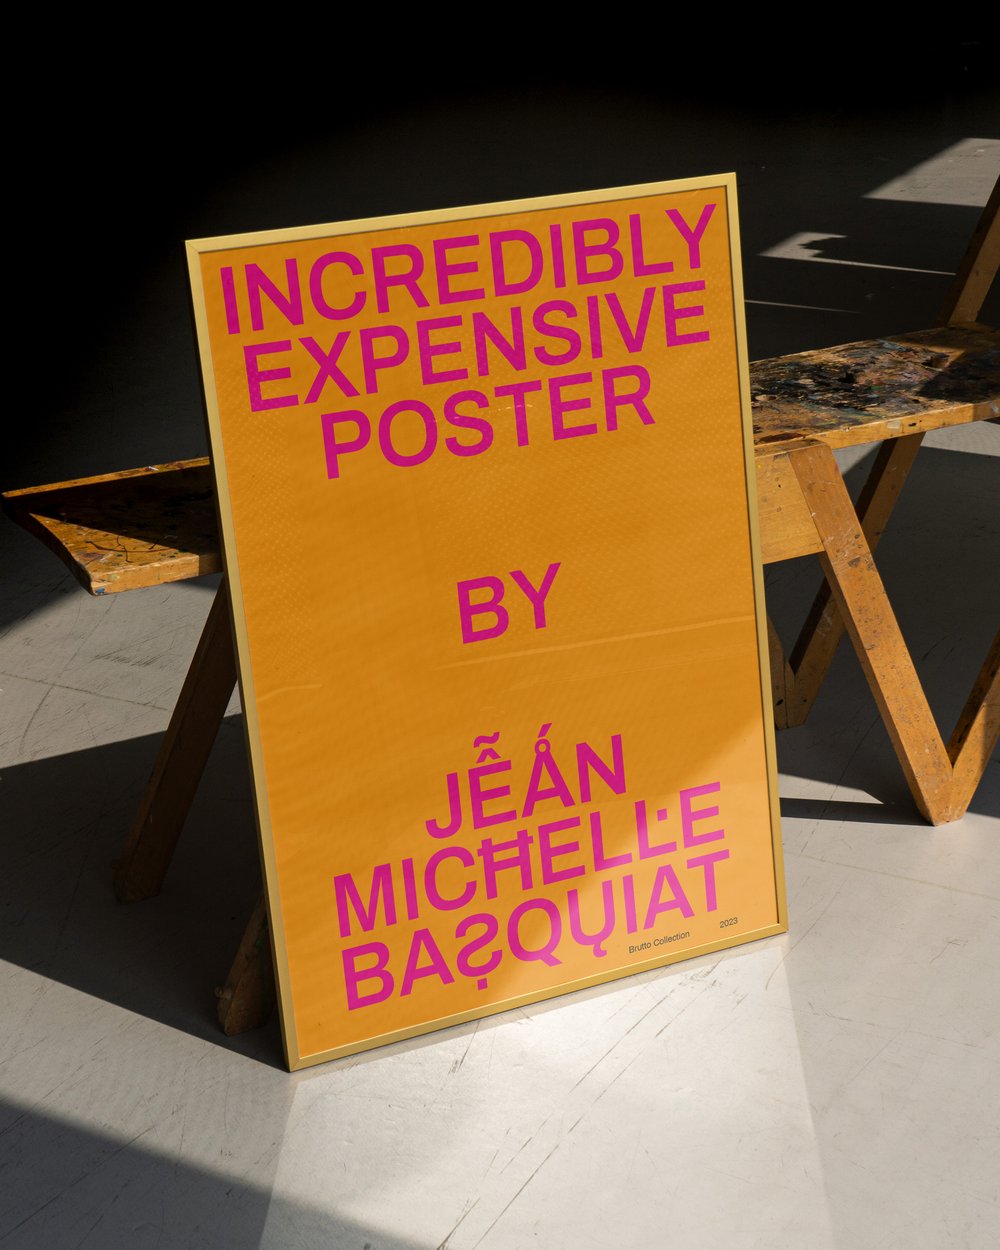 Incredibly Expensive Poster